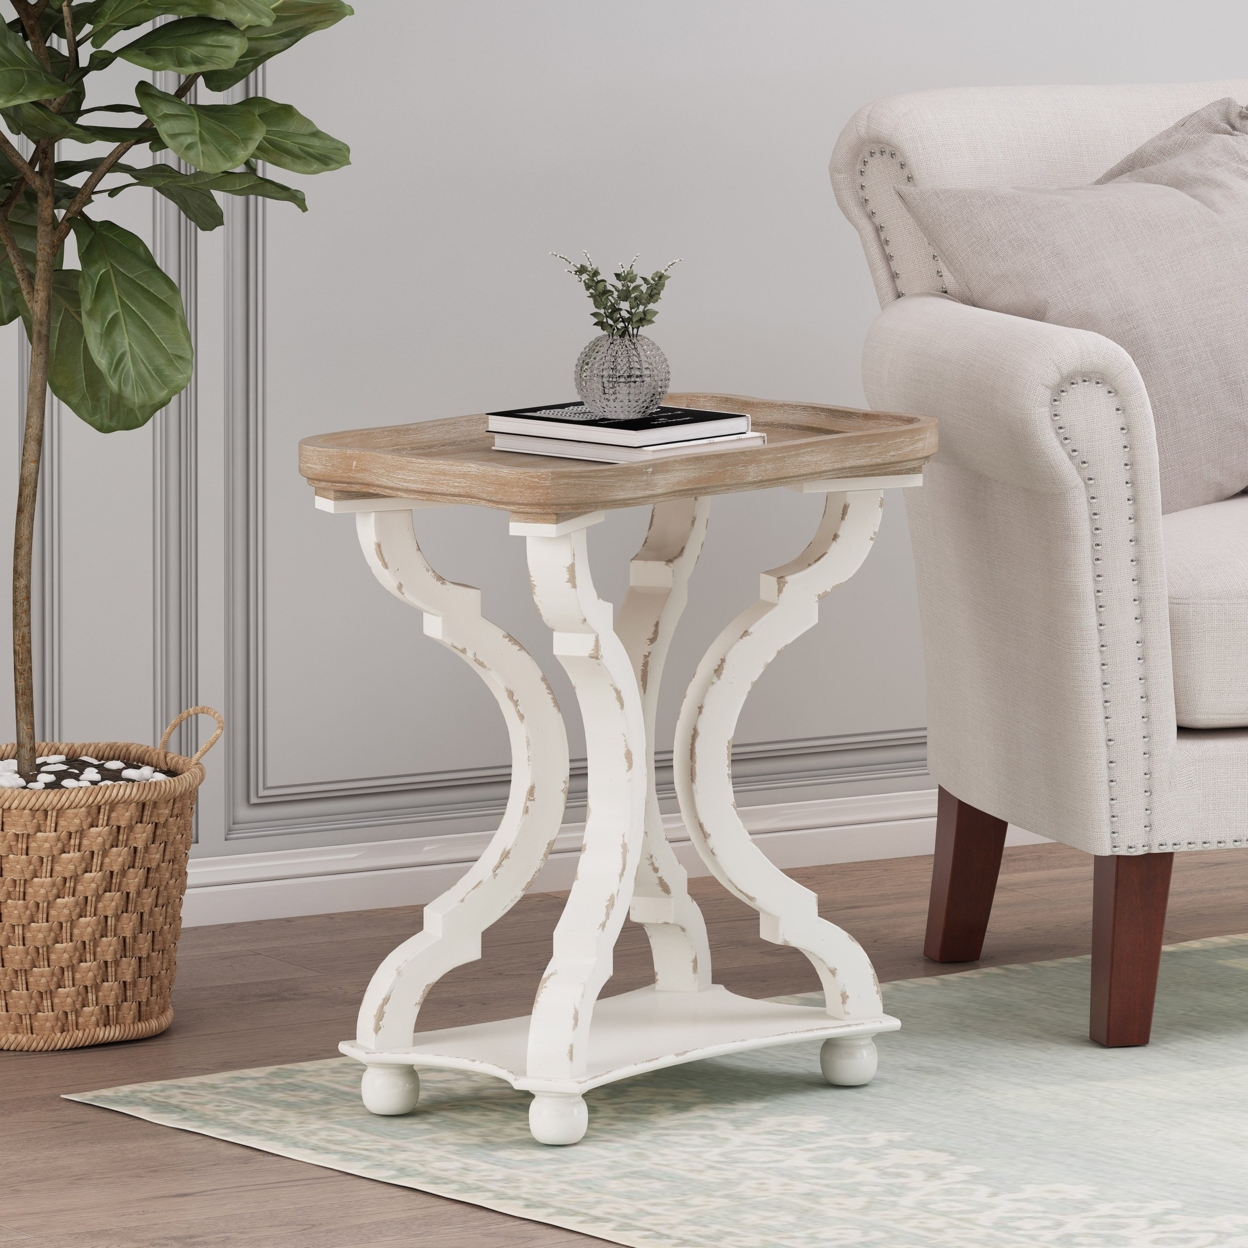 Disney French Country Accent Table With Rectangular Top - Natural